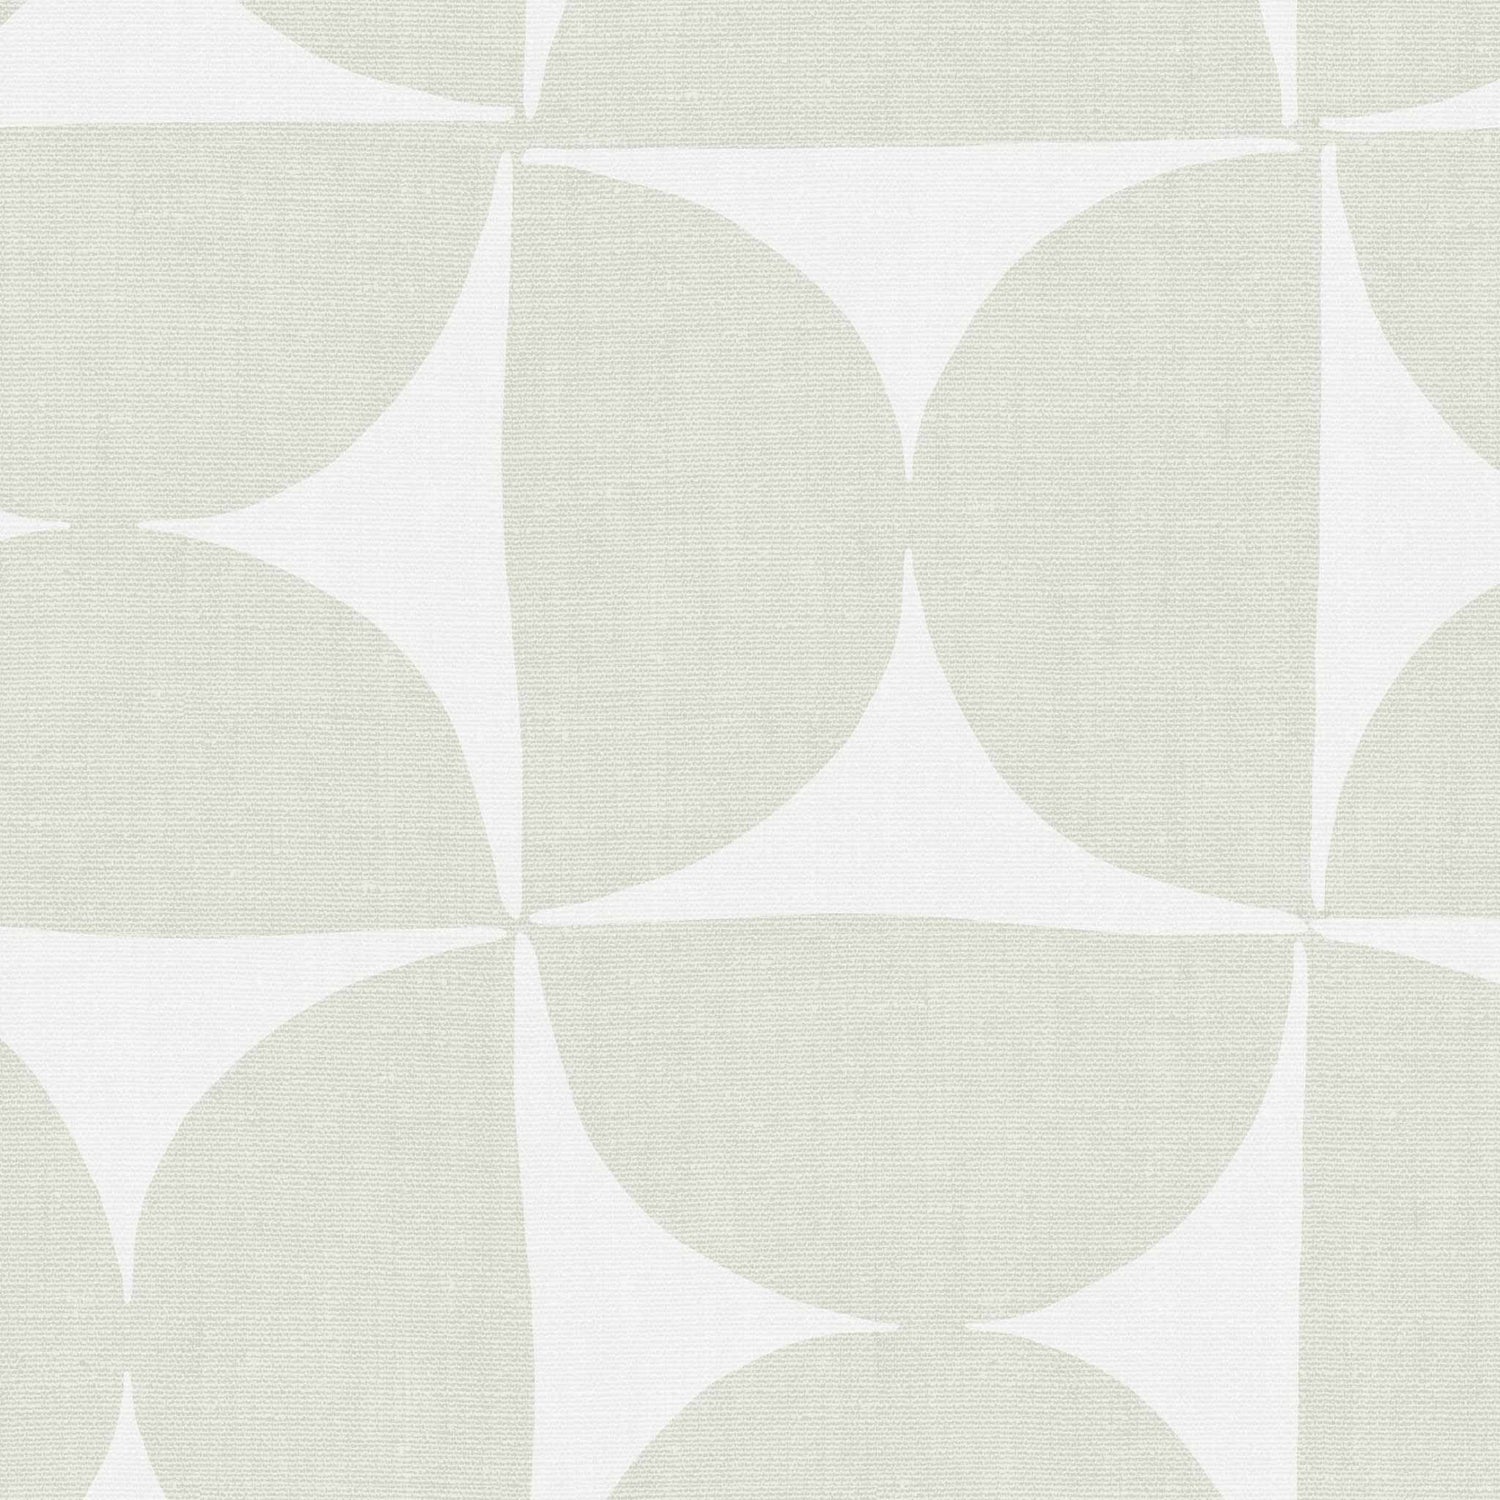 Get yourself these stylish Half Circle Tile Wallpapers for a unique wall decor solution. With its light sage design, these geometric wallpapers will easily liven up any room, making it look modern and chic.